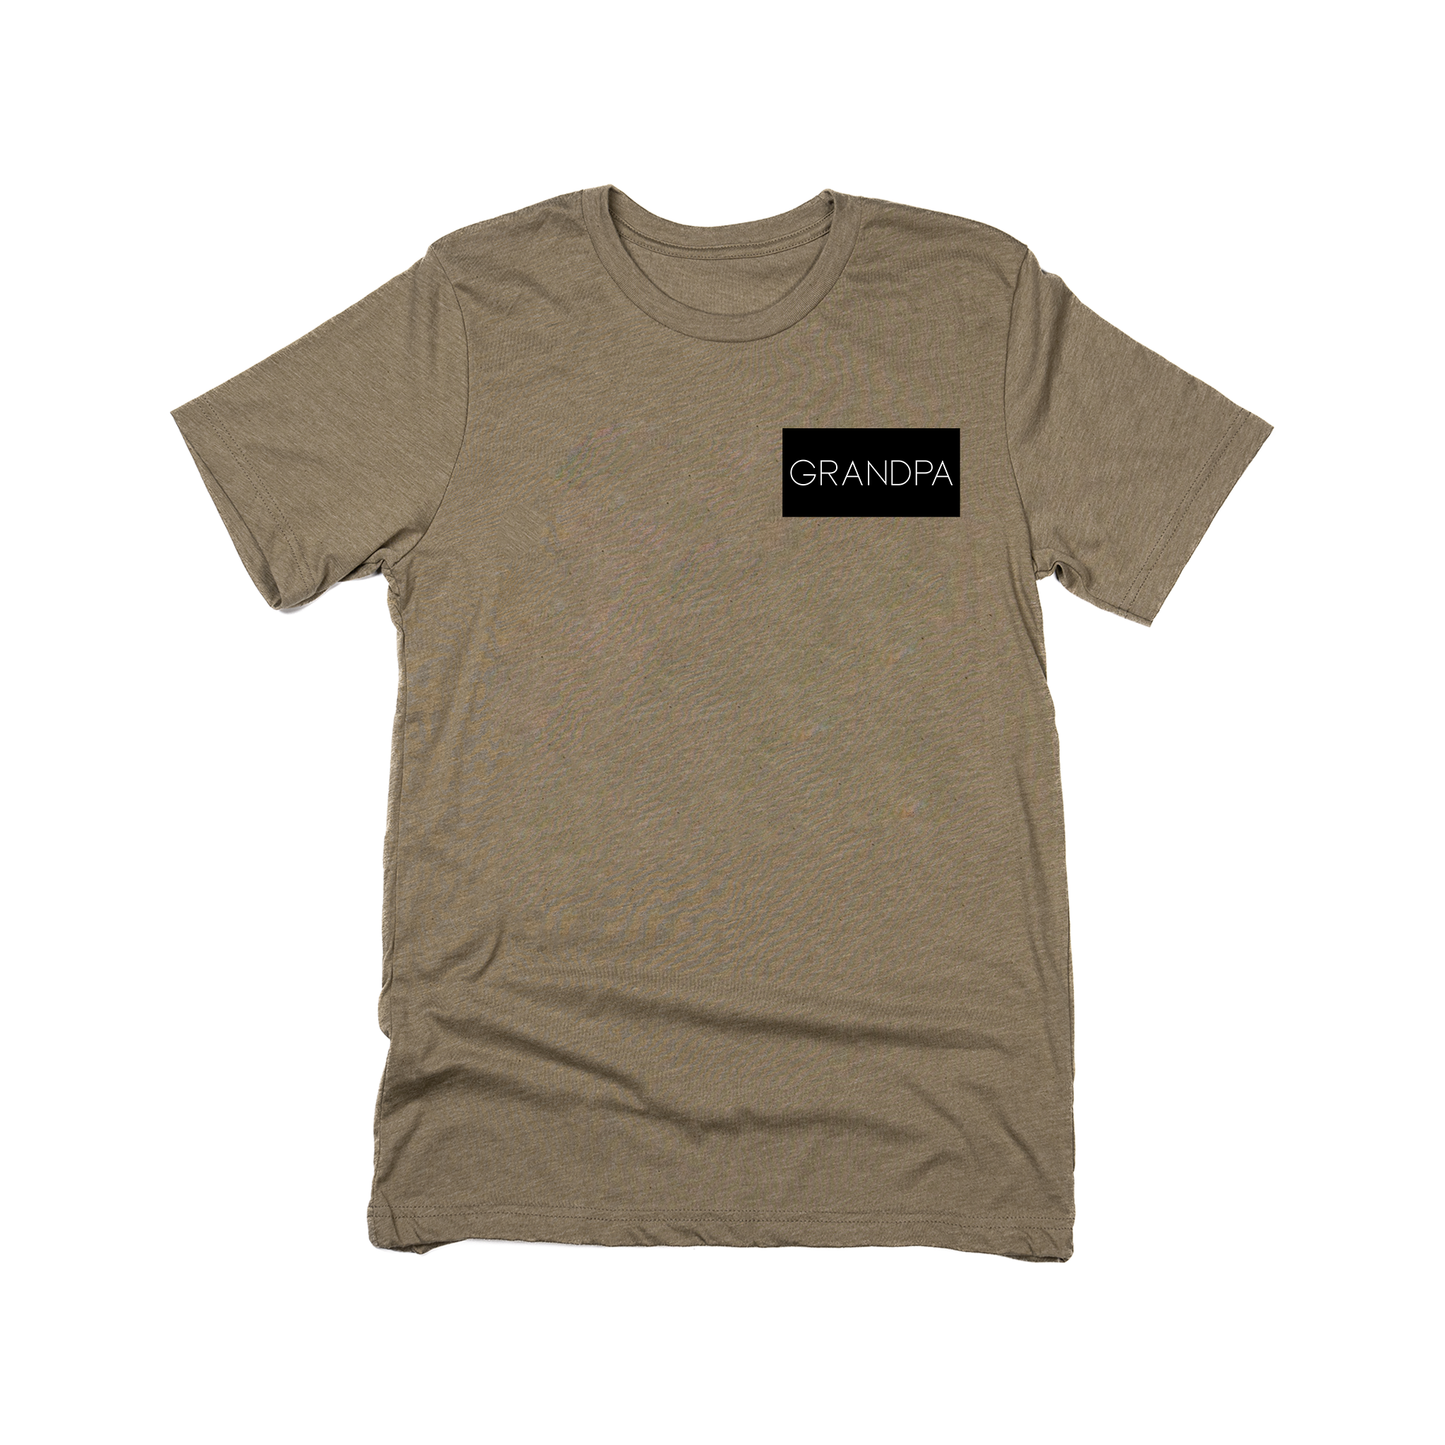 Grandpa (Boxed Collection, Pocket, Black Box/White Text) - Tee (Olive)